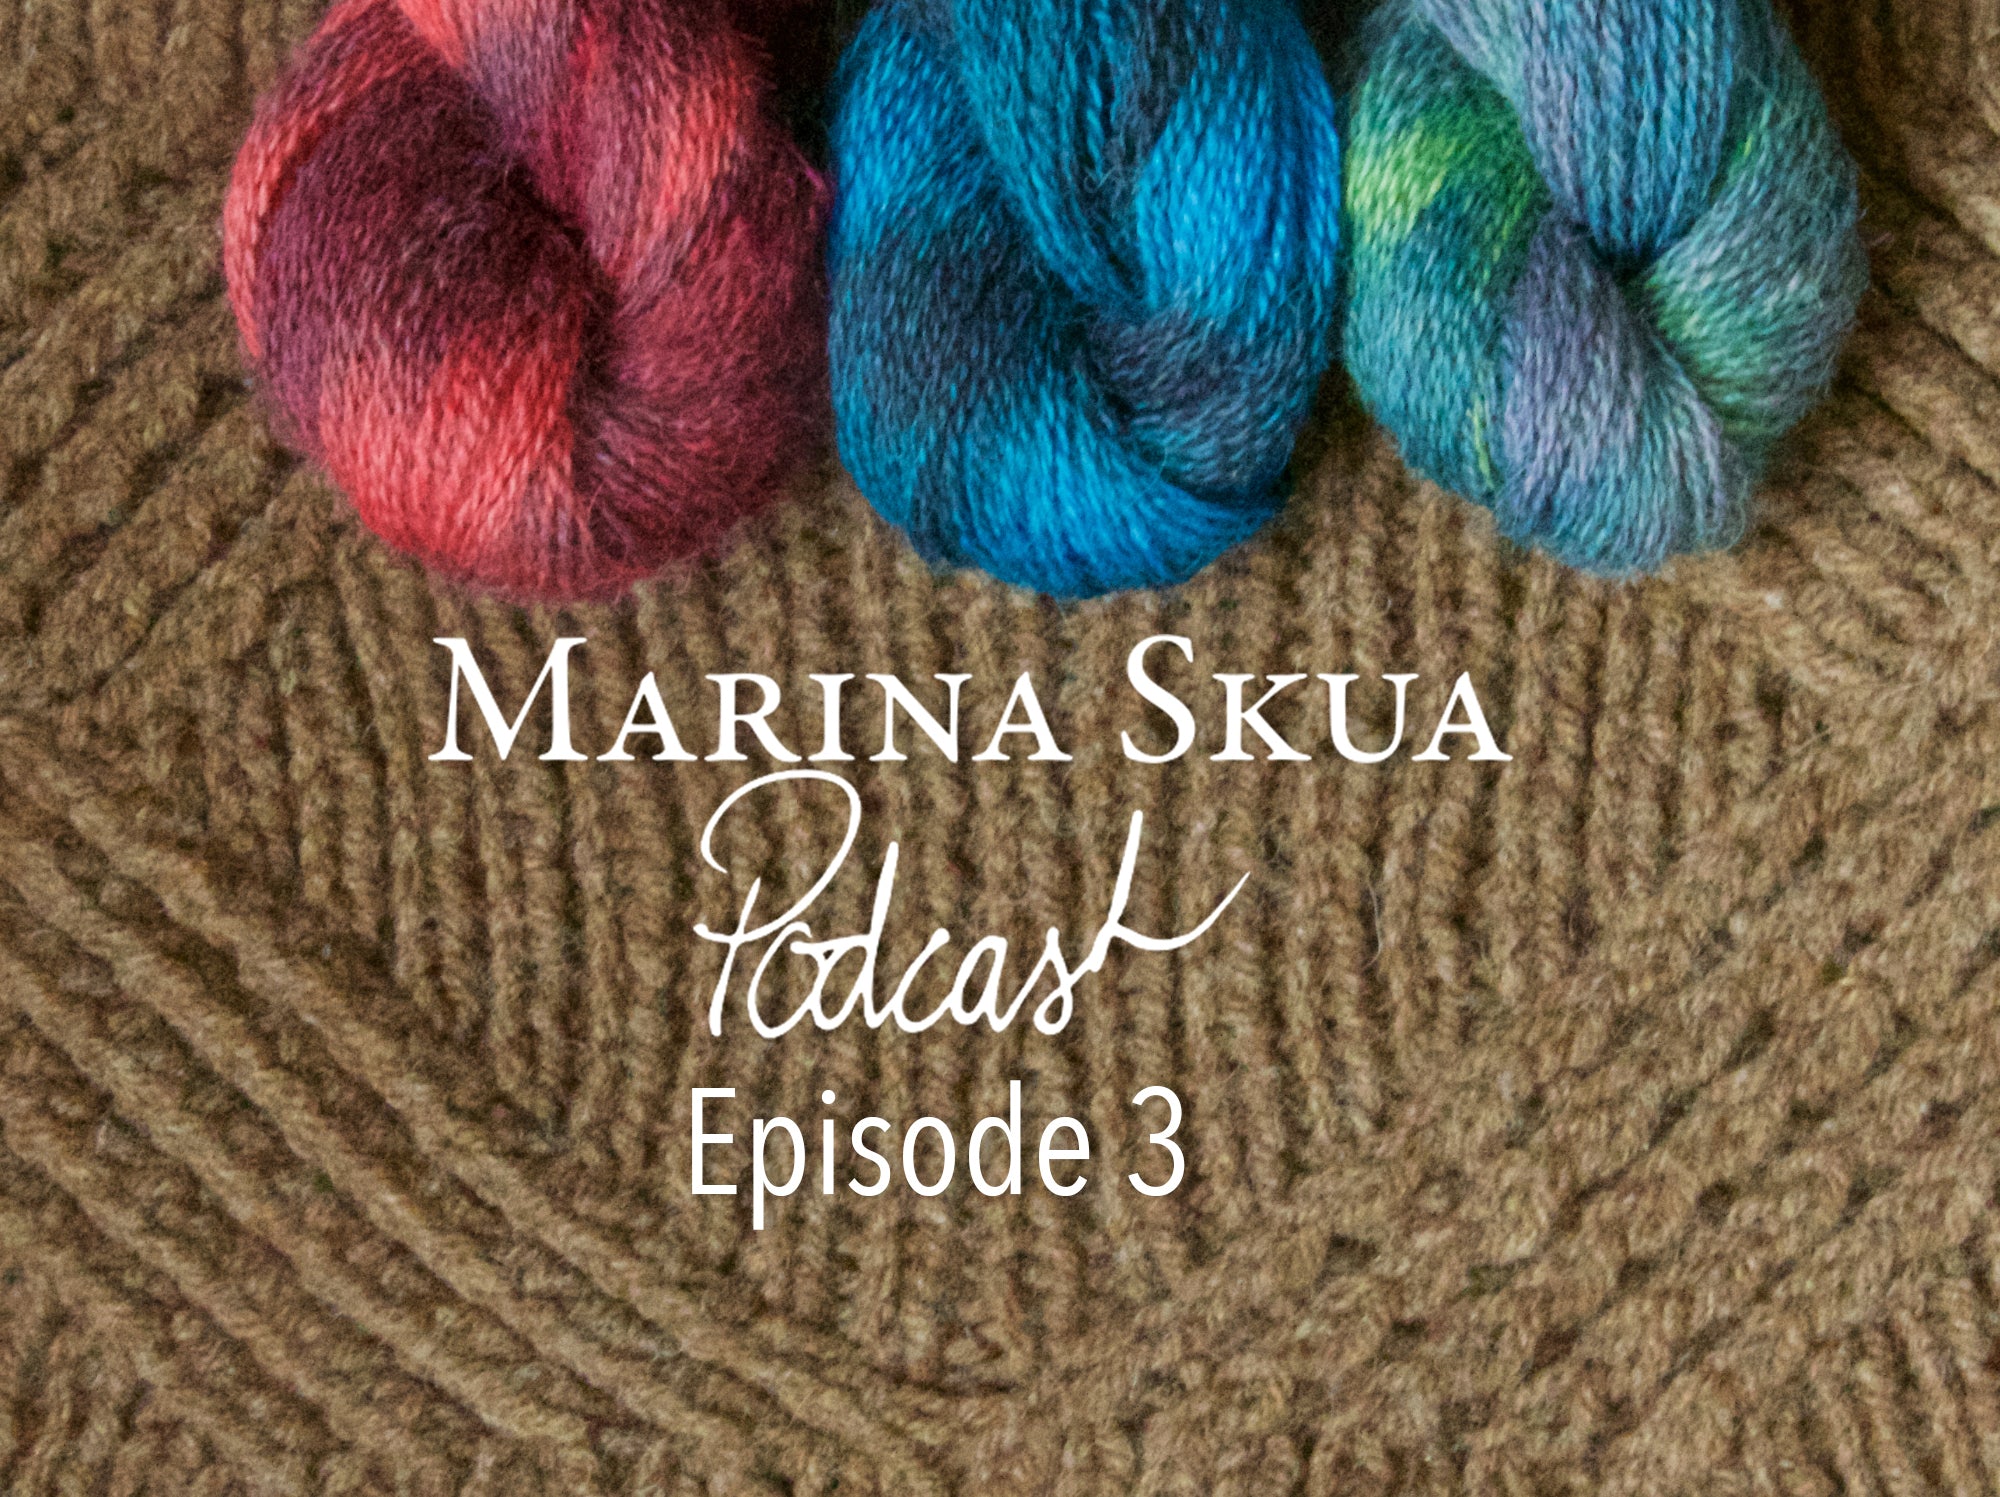 Episode 3 of the Podcast – New designs, new yarn base, and stranded colourwork